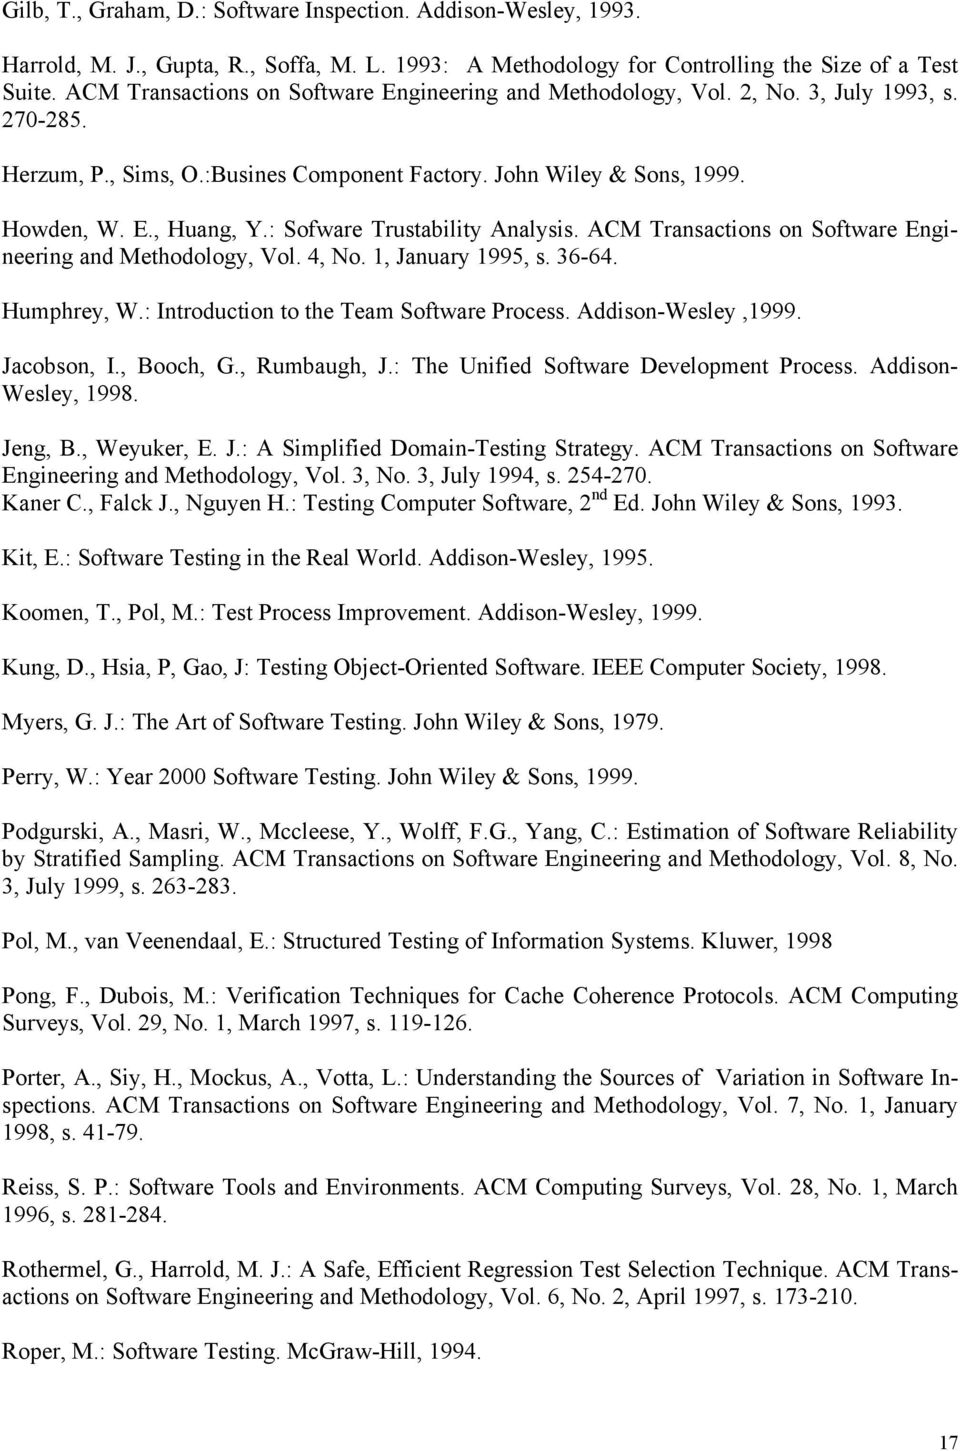 : Sofware Trustability Analysis. ACM Transactions on Software Engineering and Methodology, Vol. 4, No. 1, January 1995, s. 36-64. Humphrey, W.: Introduction to the Team Software Process.